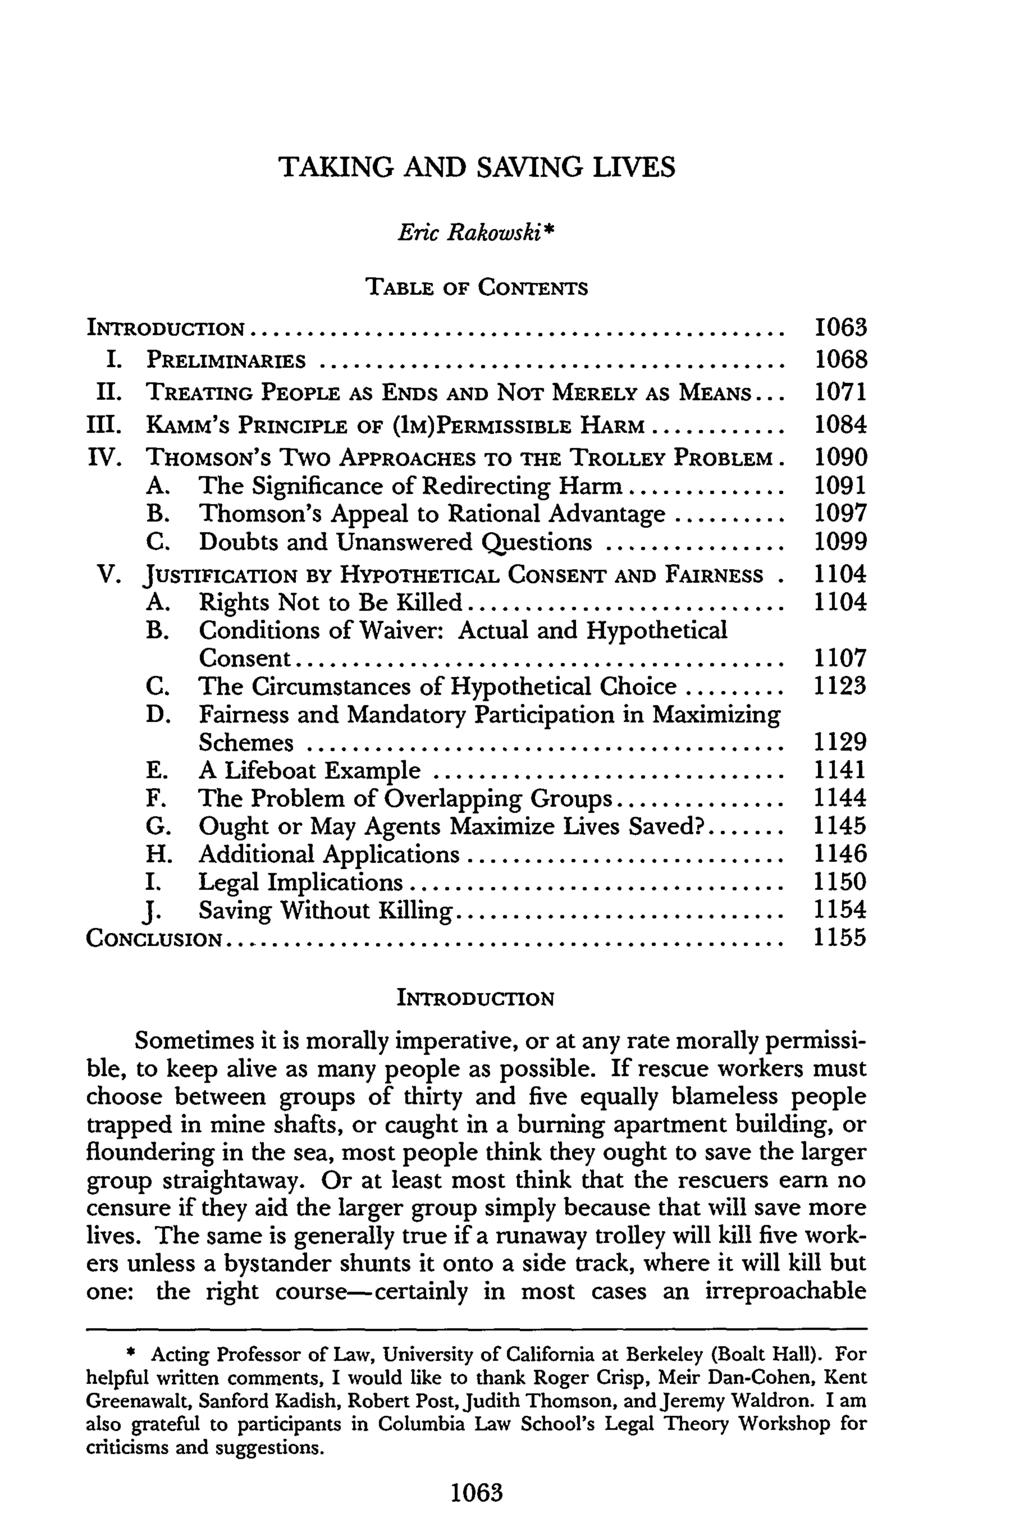 TAKING AND SAVING LIVES Eric Rakowski* TABLE OF CONTENTS INTRODUCTION... 1063 I. PRELIMINARIES... 1068 II. TREATING PEOPLE AS ENDS AND NOT MERELY AS MEANS... 1071 III.